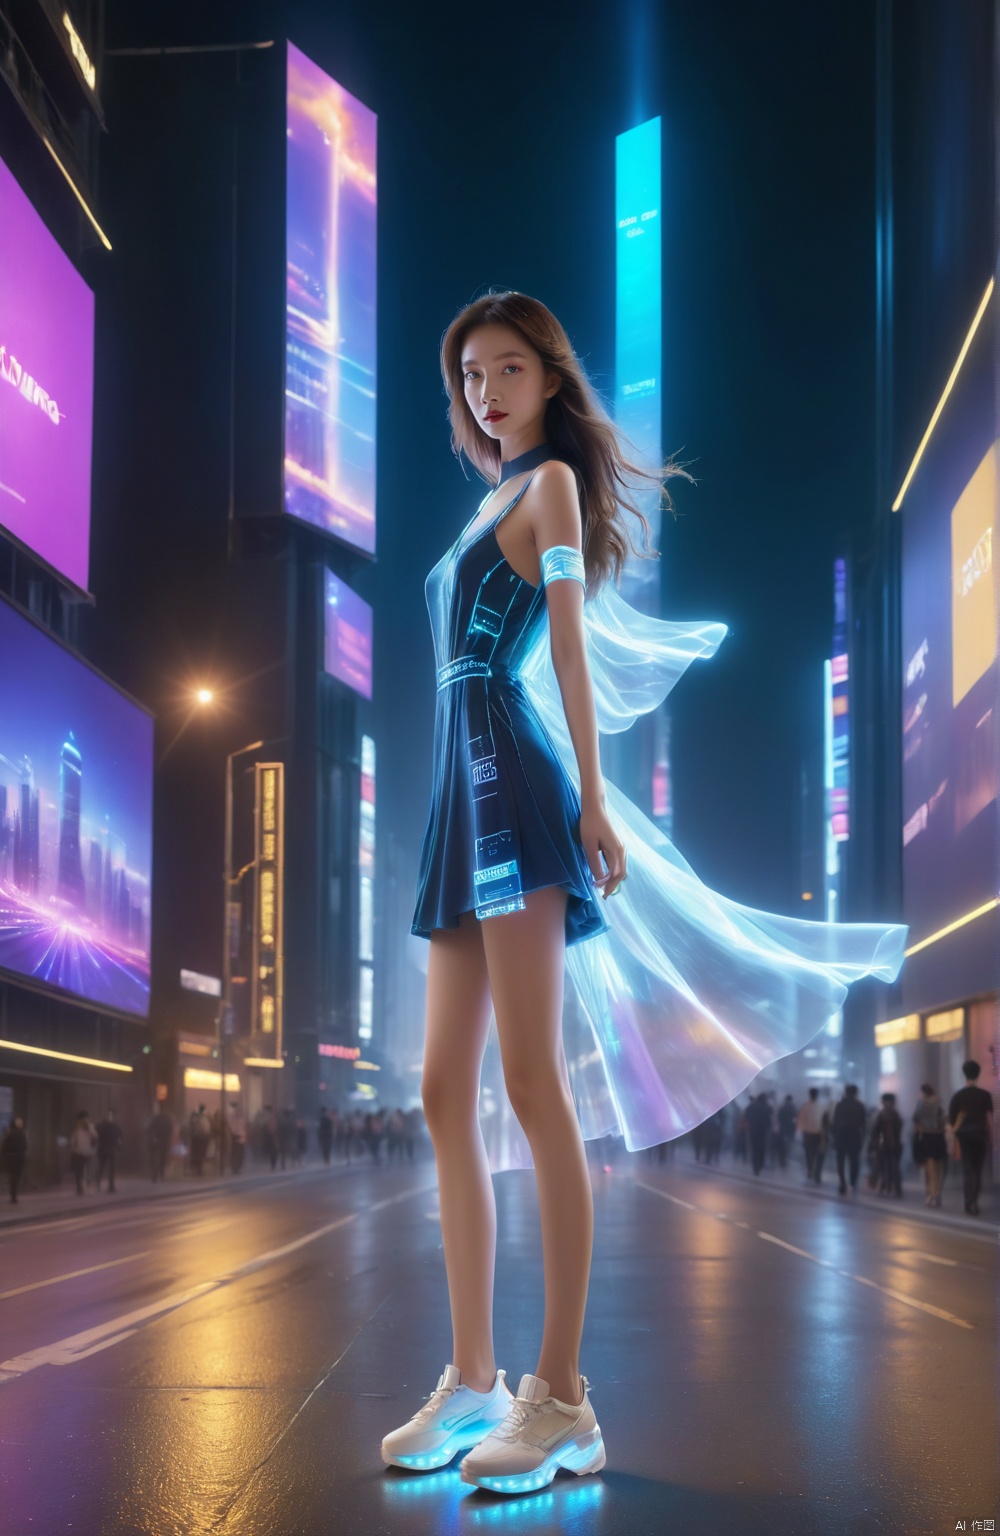 1 girl, solo, long hair, neon light, (full body), night, city street, blue_dress, luminous text on the body, multi-line light on the body, (luminous electronic screen),(electronic message flow: 1.3), holographic projection, (luminous electronic screen on the arm: 1.2), luminous text on the thigh, (girl pose: 1.3), luminous electronic shoes, (Masterpiece, best quality: 1.2),16k, horizontal image quality, (luminous electronic screen), electronic message flow, holographic projection,, luminous electronic shoes,  city blocks, skyscrapers, scenery,
A solitary girl with flowing long hair stands on a city street at night amidst neon lights, dressed in a blue dress. Her figure is adorned with illuminating multi-line light patterns, and she features a built-in luminous electronic screen showcasing an electronic message flow (1.3). Additionally, there's a holographic projection, an arm-mounted glowing electronic screen presenting data '1.2', as well as radiant text displayed on her thigh. The girl adopts a captivating pose numbered 1.3, complemented by her high-tech, luminescent electronic shoes. This visual masterpiece boasts the best quality at a 16k horizontal image resolution. The background imagery consists of a luminous electronic screen, scrolling electronic message streams, holographic projections, and towering skyscrapers amidst urban blocks.
